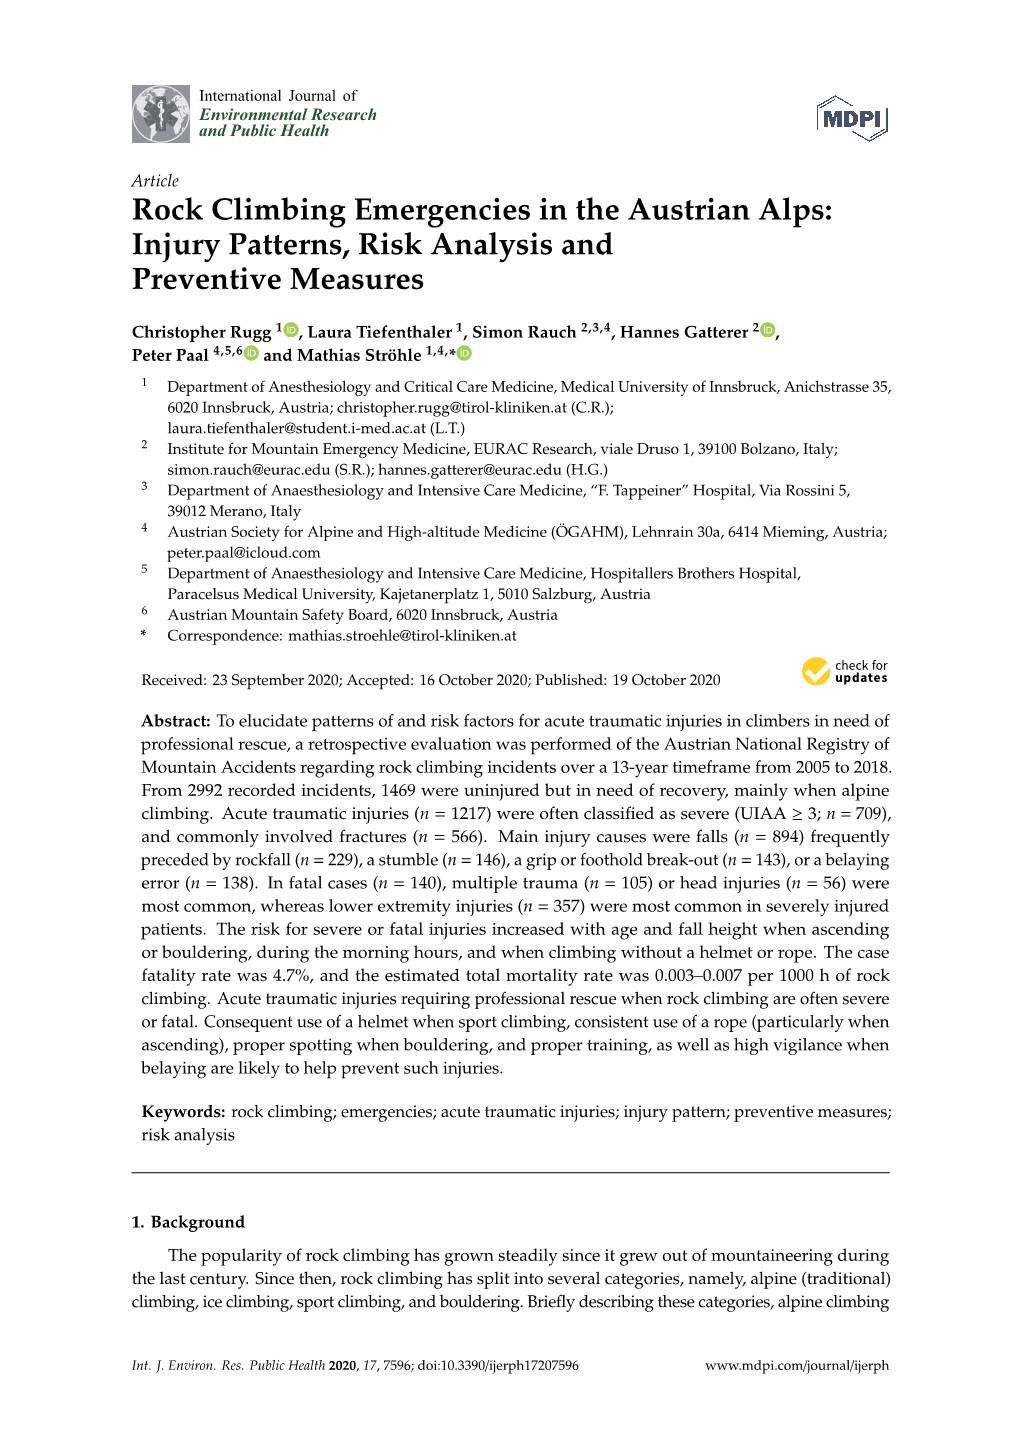 Rock Climbing Emergencies in the Austrian Alps: Injury Patterns, Risk Analysis and Preventive Measures